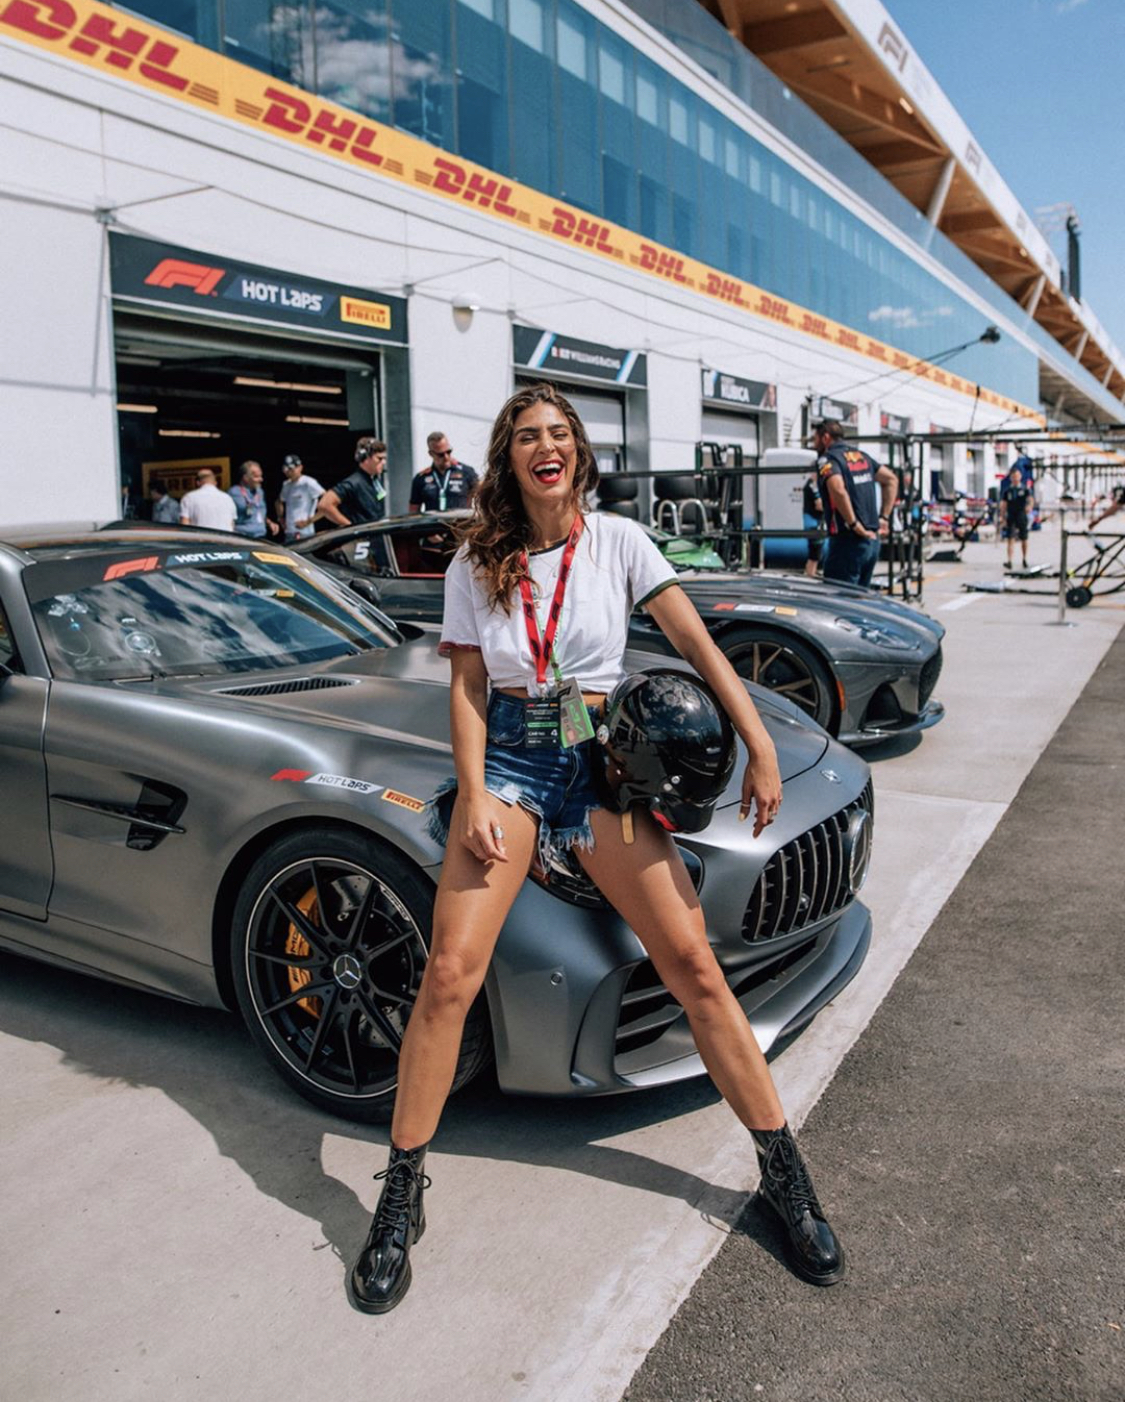 Montreal Grand Prix is the biggest sporting event of the year